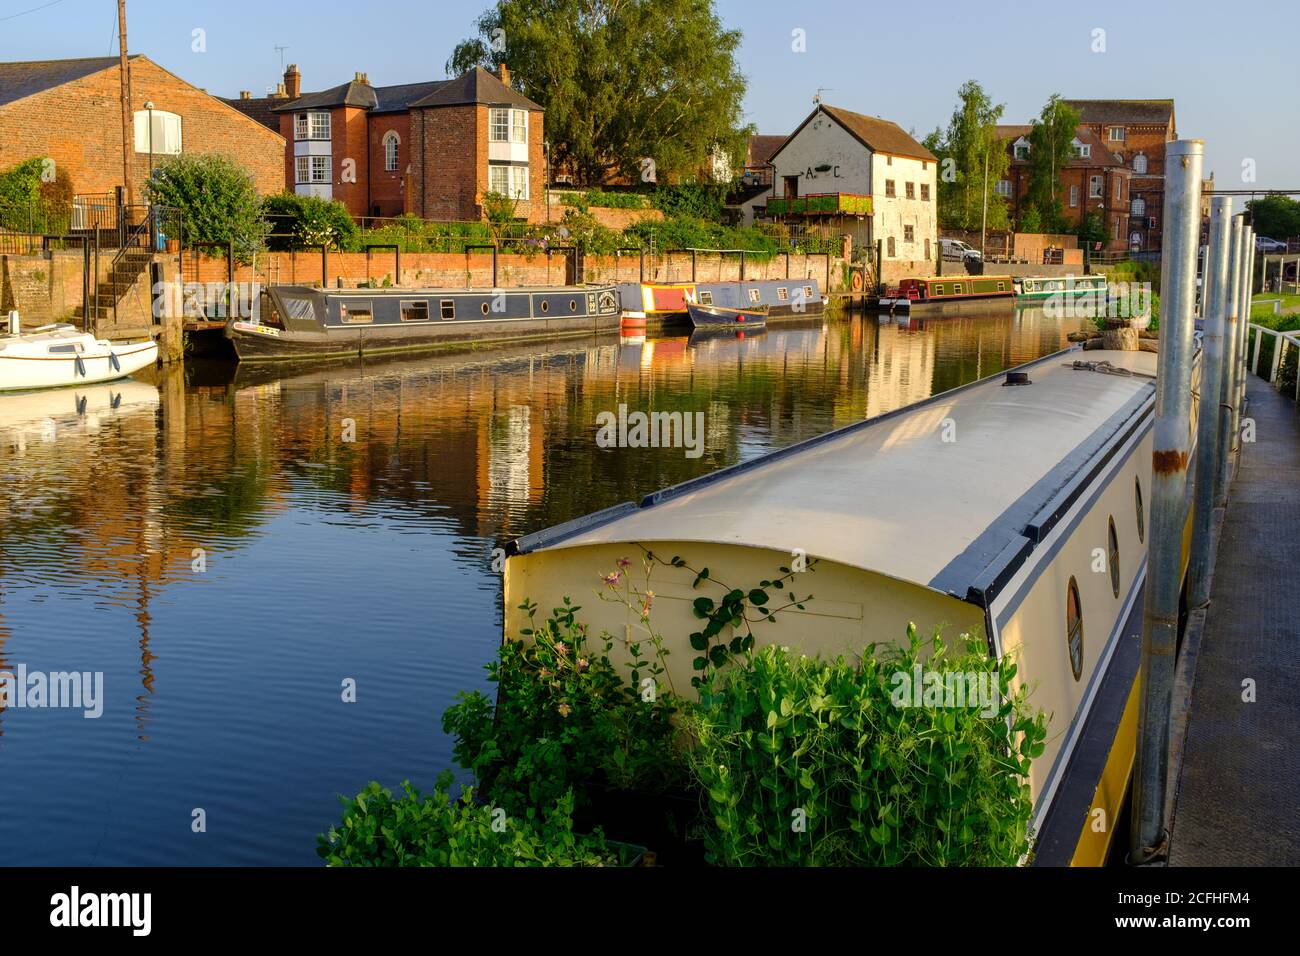 Canal boats (Narrowboats) on the River Avon on a mid-summer evening, Tewkesbury, England Stock Photo